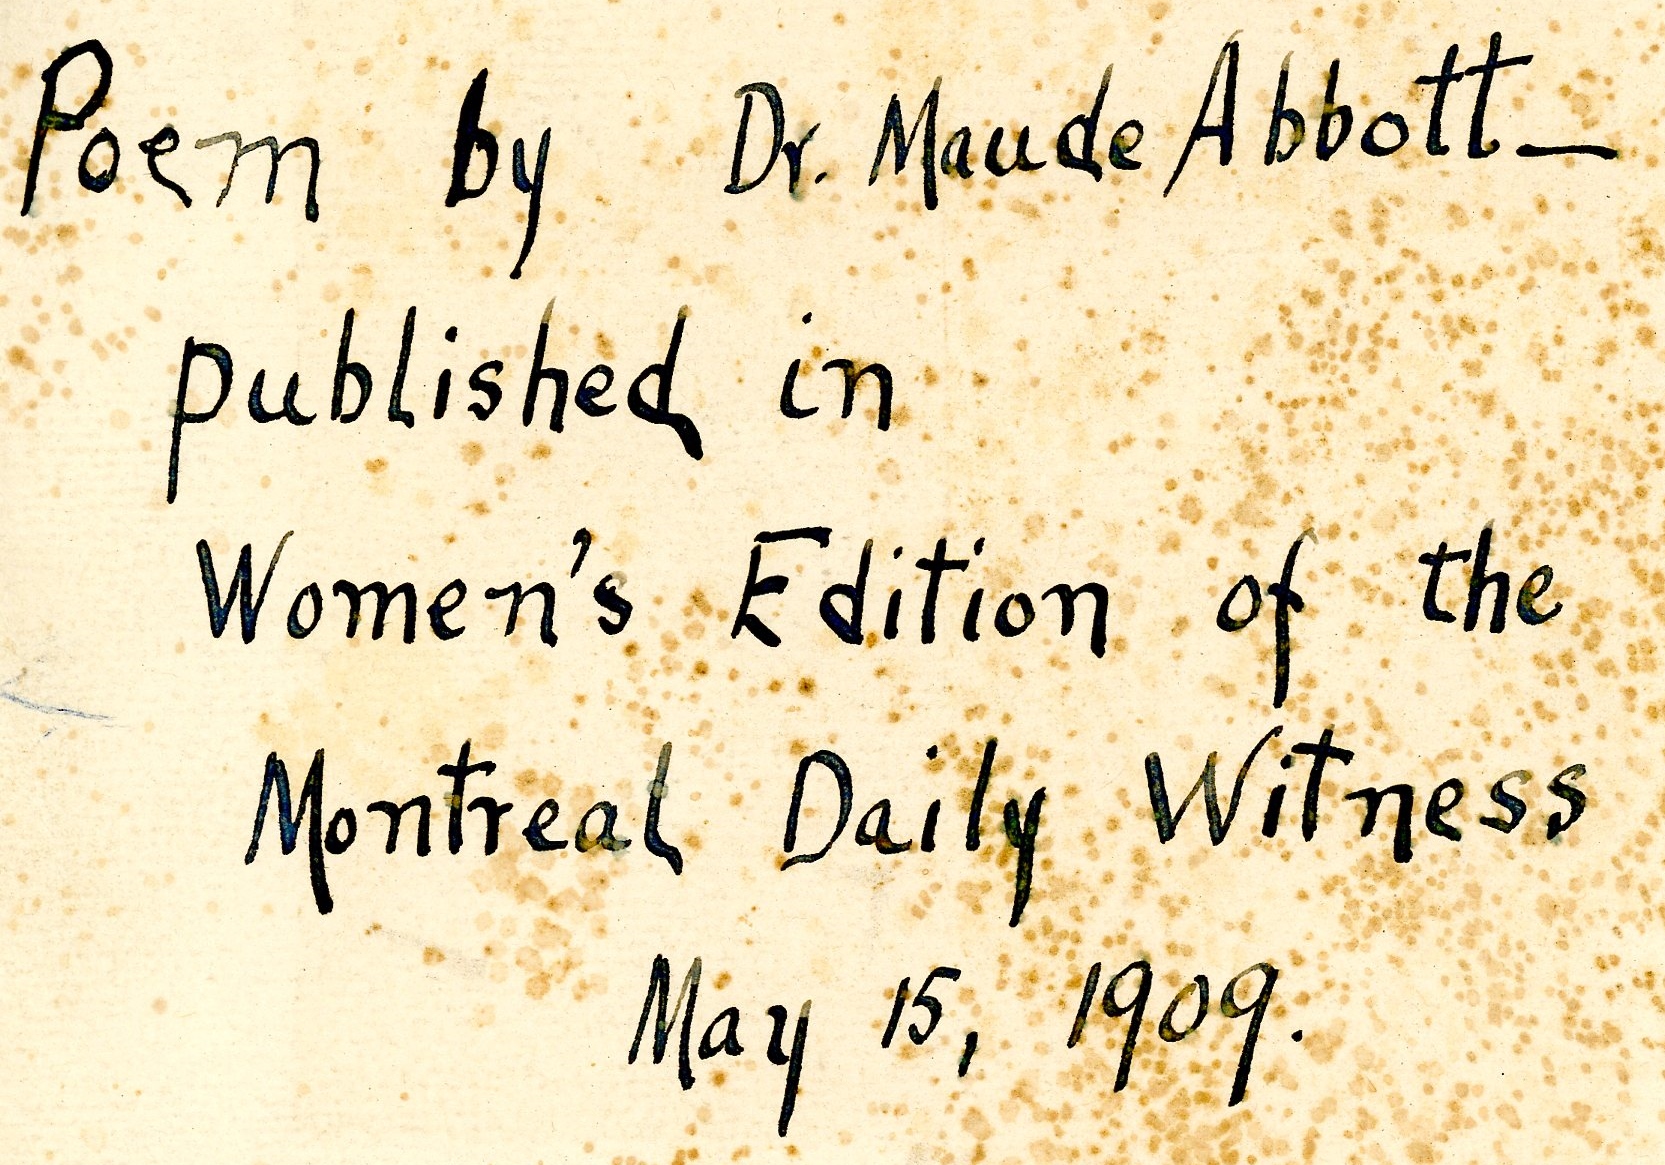 Note written in black ink on sepia paper. It reads: “Poem by Dr. Maude Abbott – published in Women’s Edition of the Montreal Daily Witness May 15, 1909”.